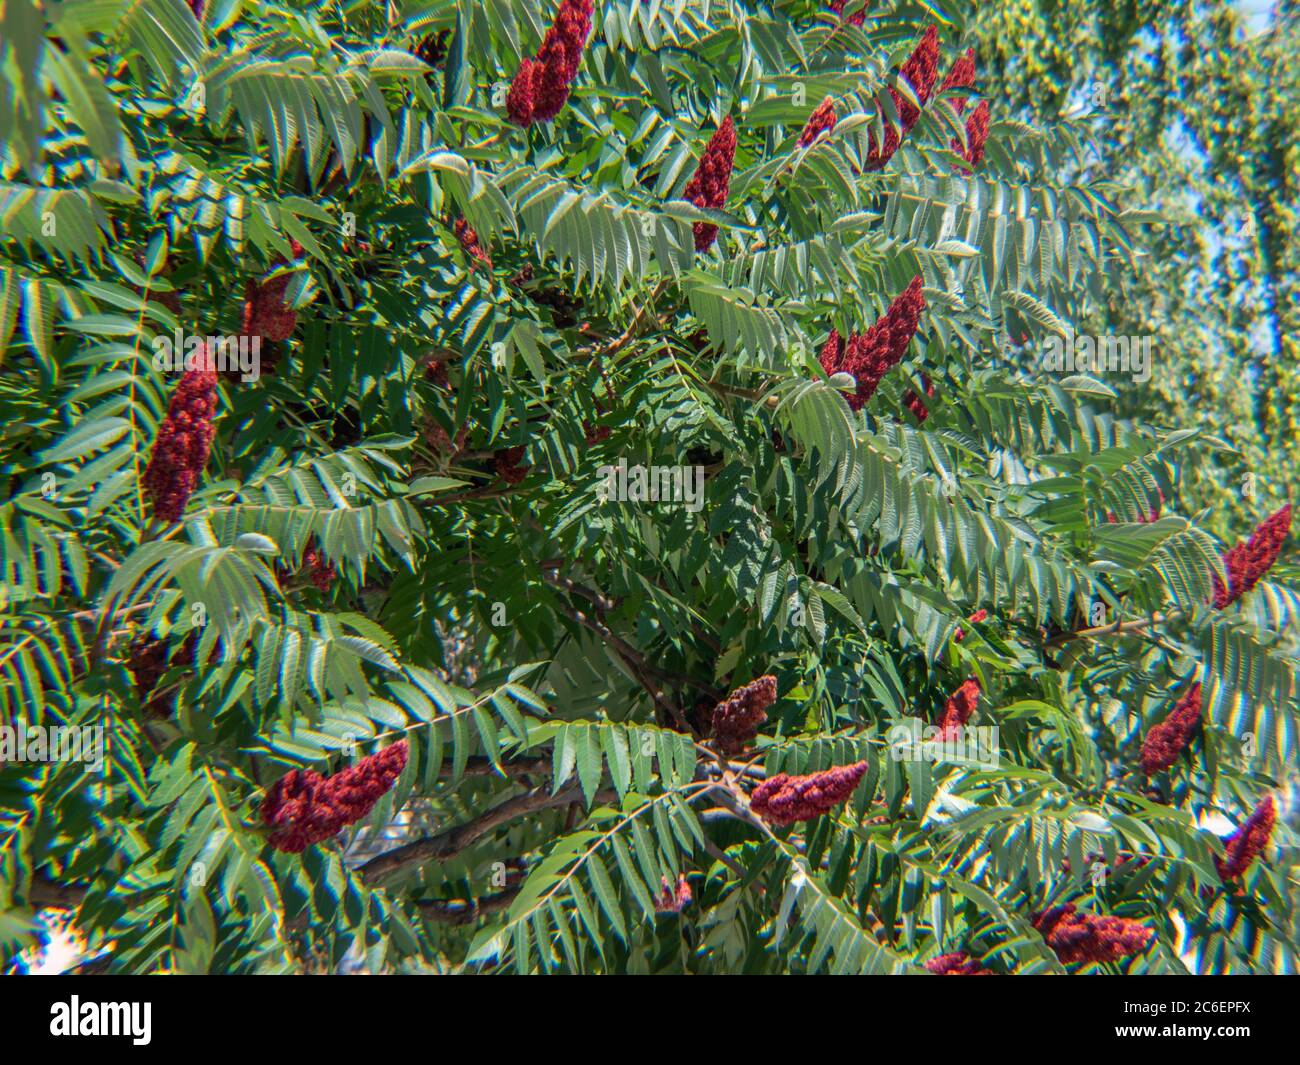 Rhus typhina fruit, the staghorn sumac flowering tree,  Stag's horn sumach flowers Stock Photo